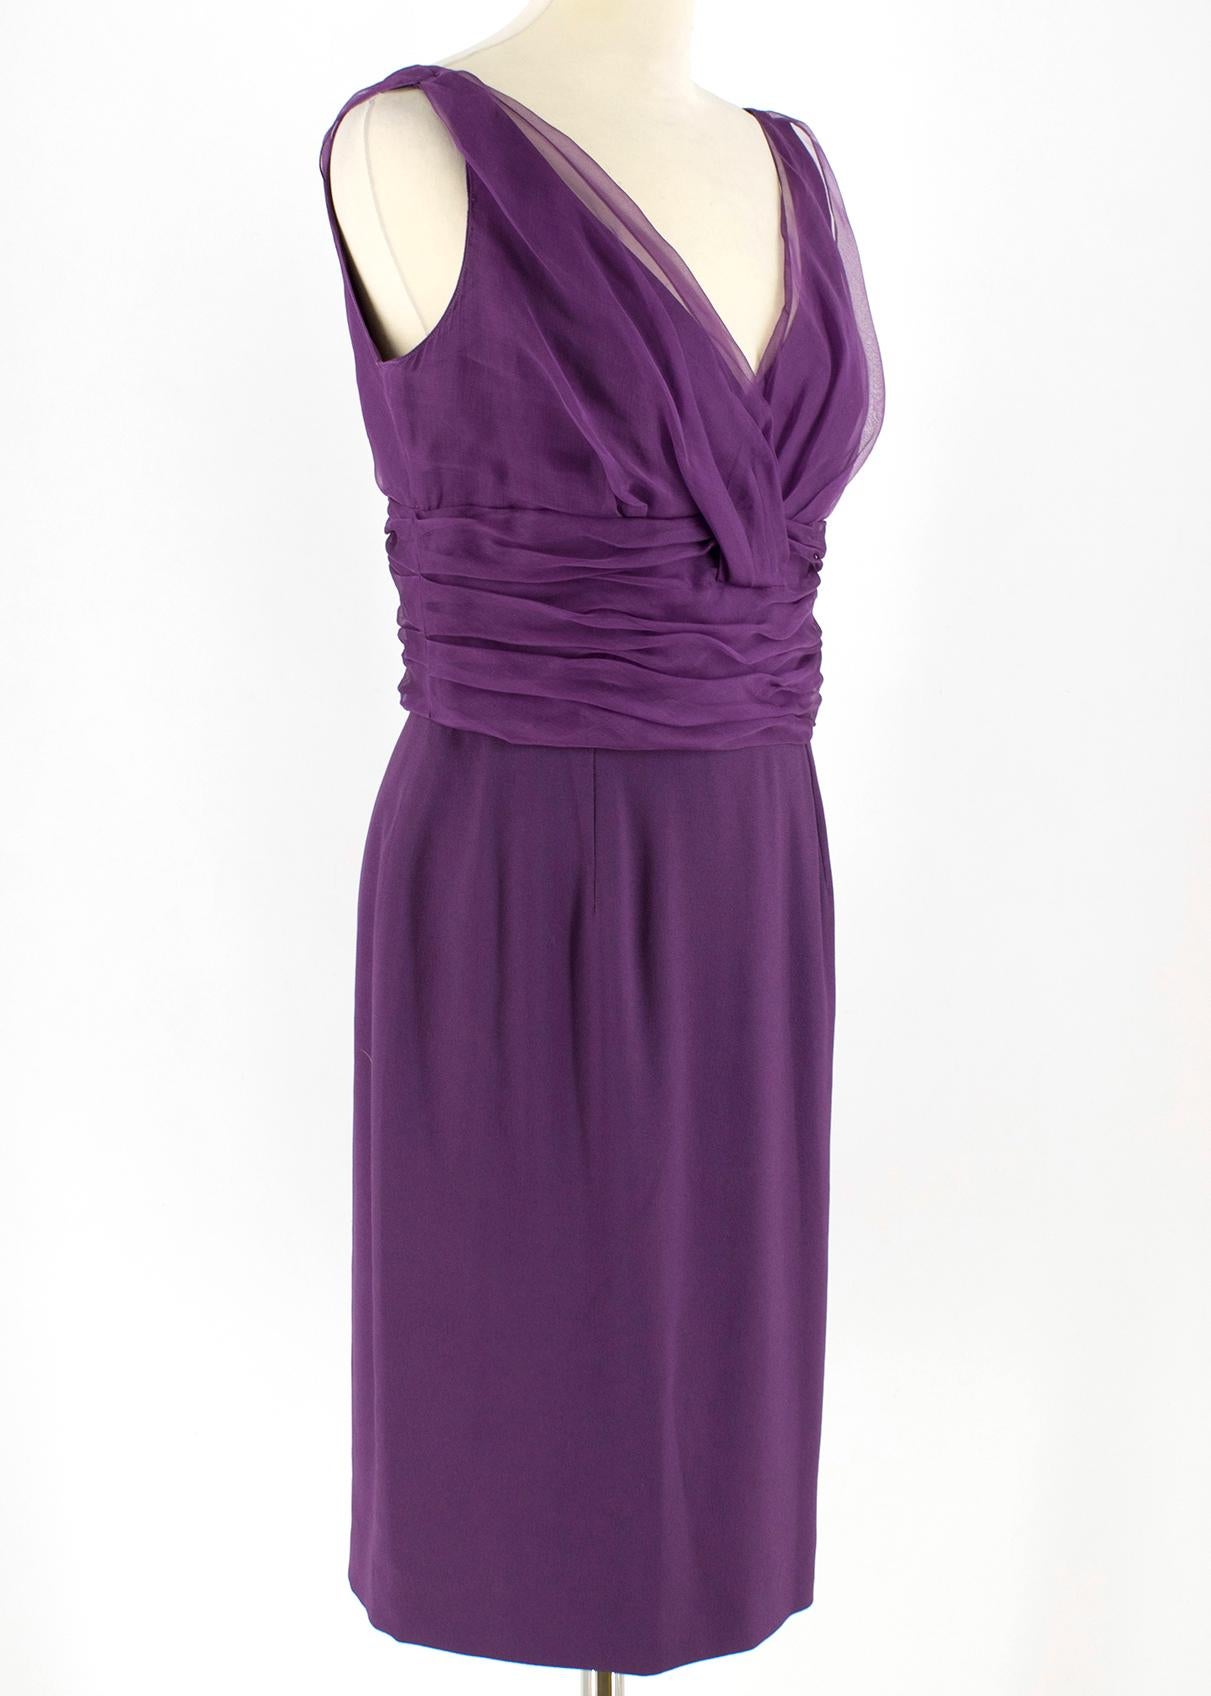 Christian Dior Purple Pleated Draped Dress

- Purple, pleated waist and bust
- Crossover detailed bust
- Sleeveless
- Side buttoned loop fastening closure
- V-neck
- 57% acetate, 43% viscose, double lining- 100% silk

Please note, these items are